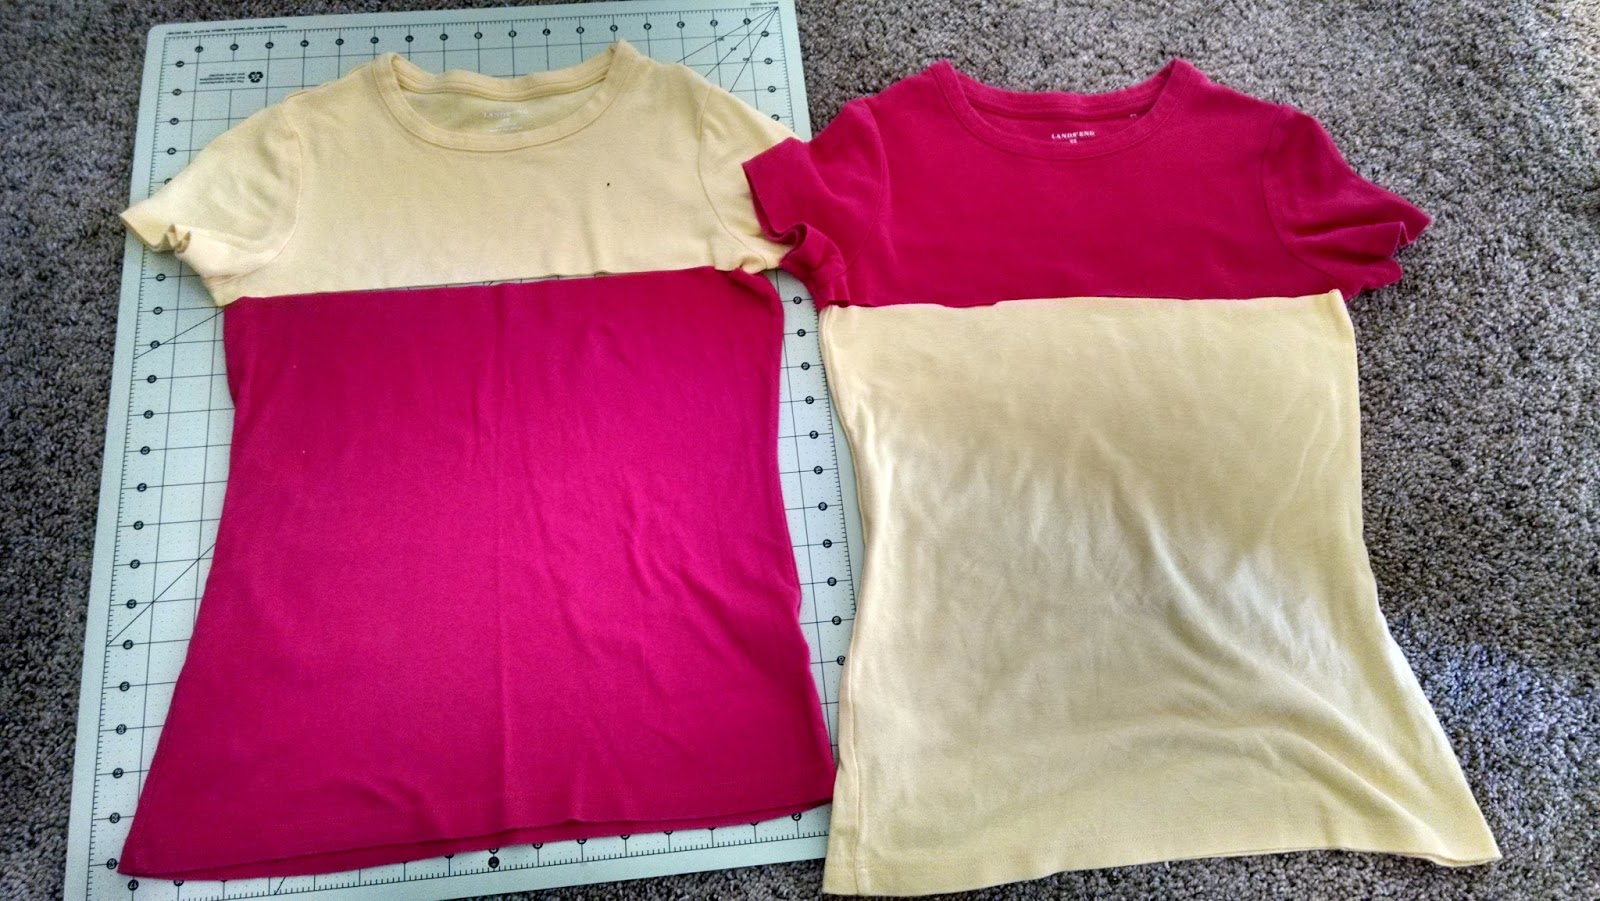 Through My Front Window: Two New Shirts - Color Blocking!